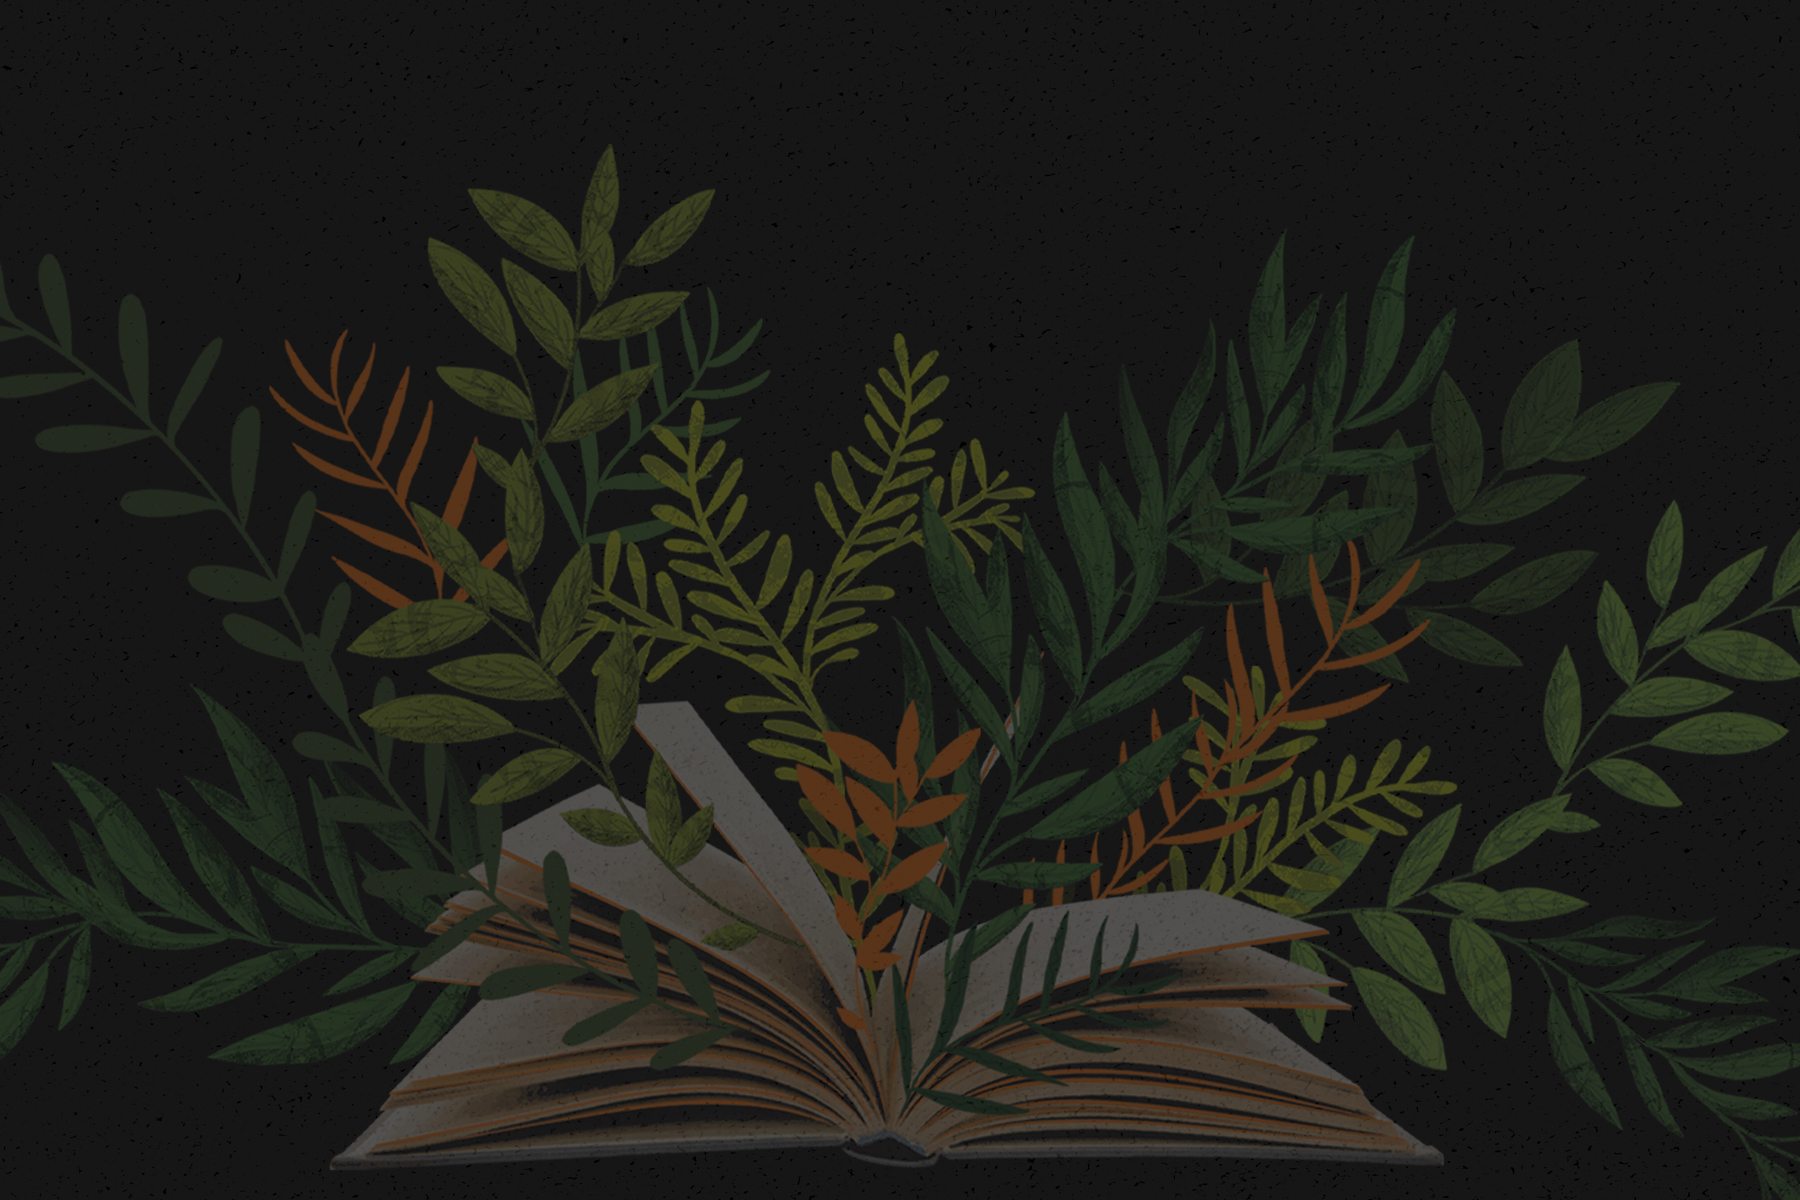 A black background with illustrated plant life emerging from a book.